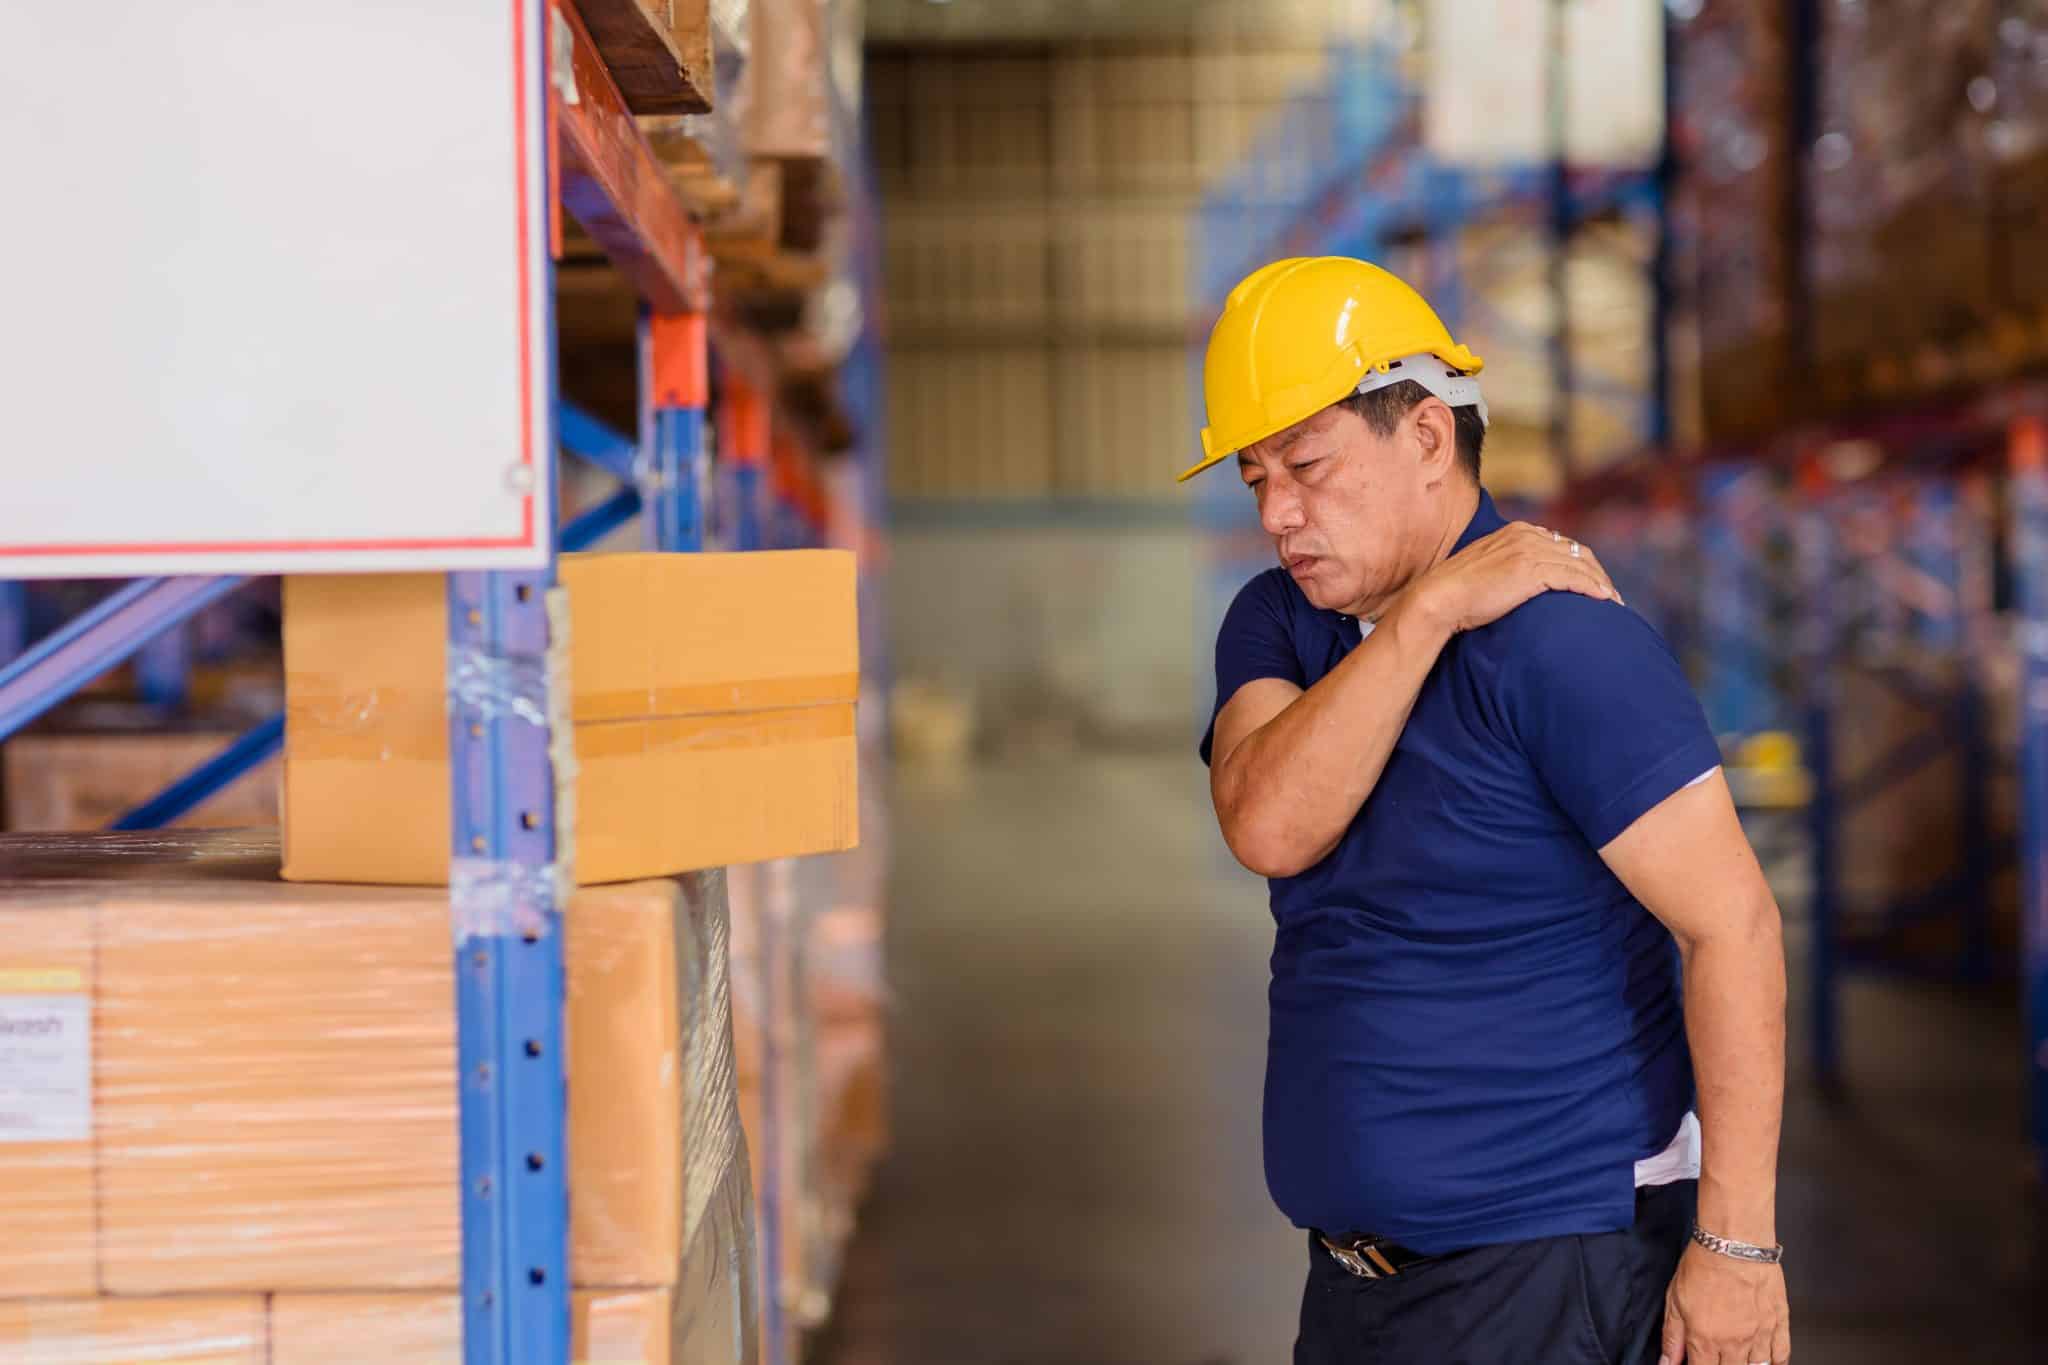 warehouse worker with shoulder injury